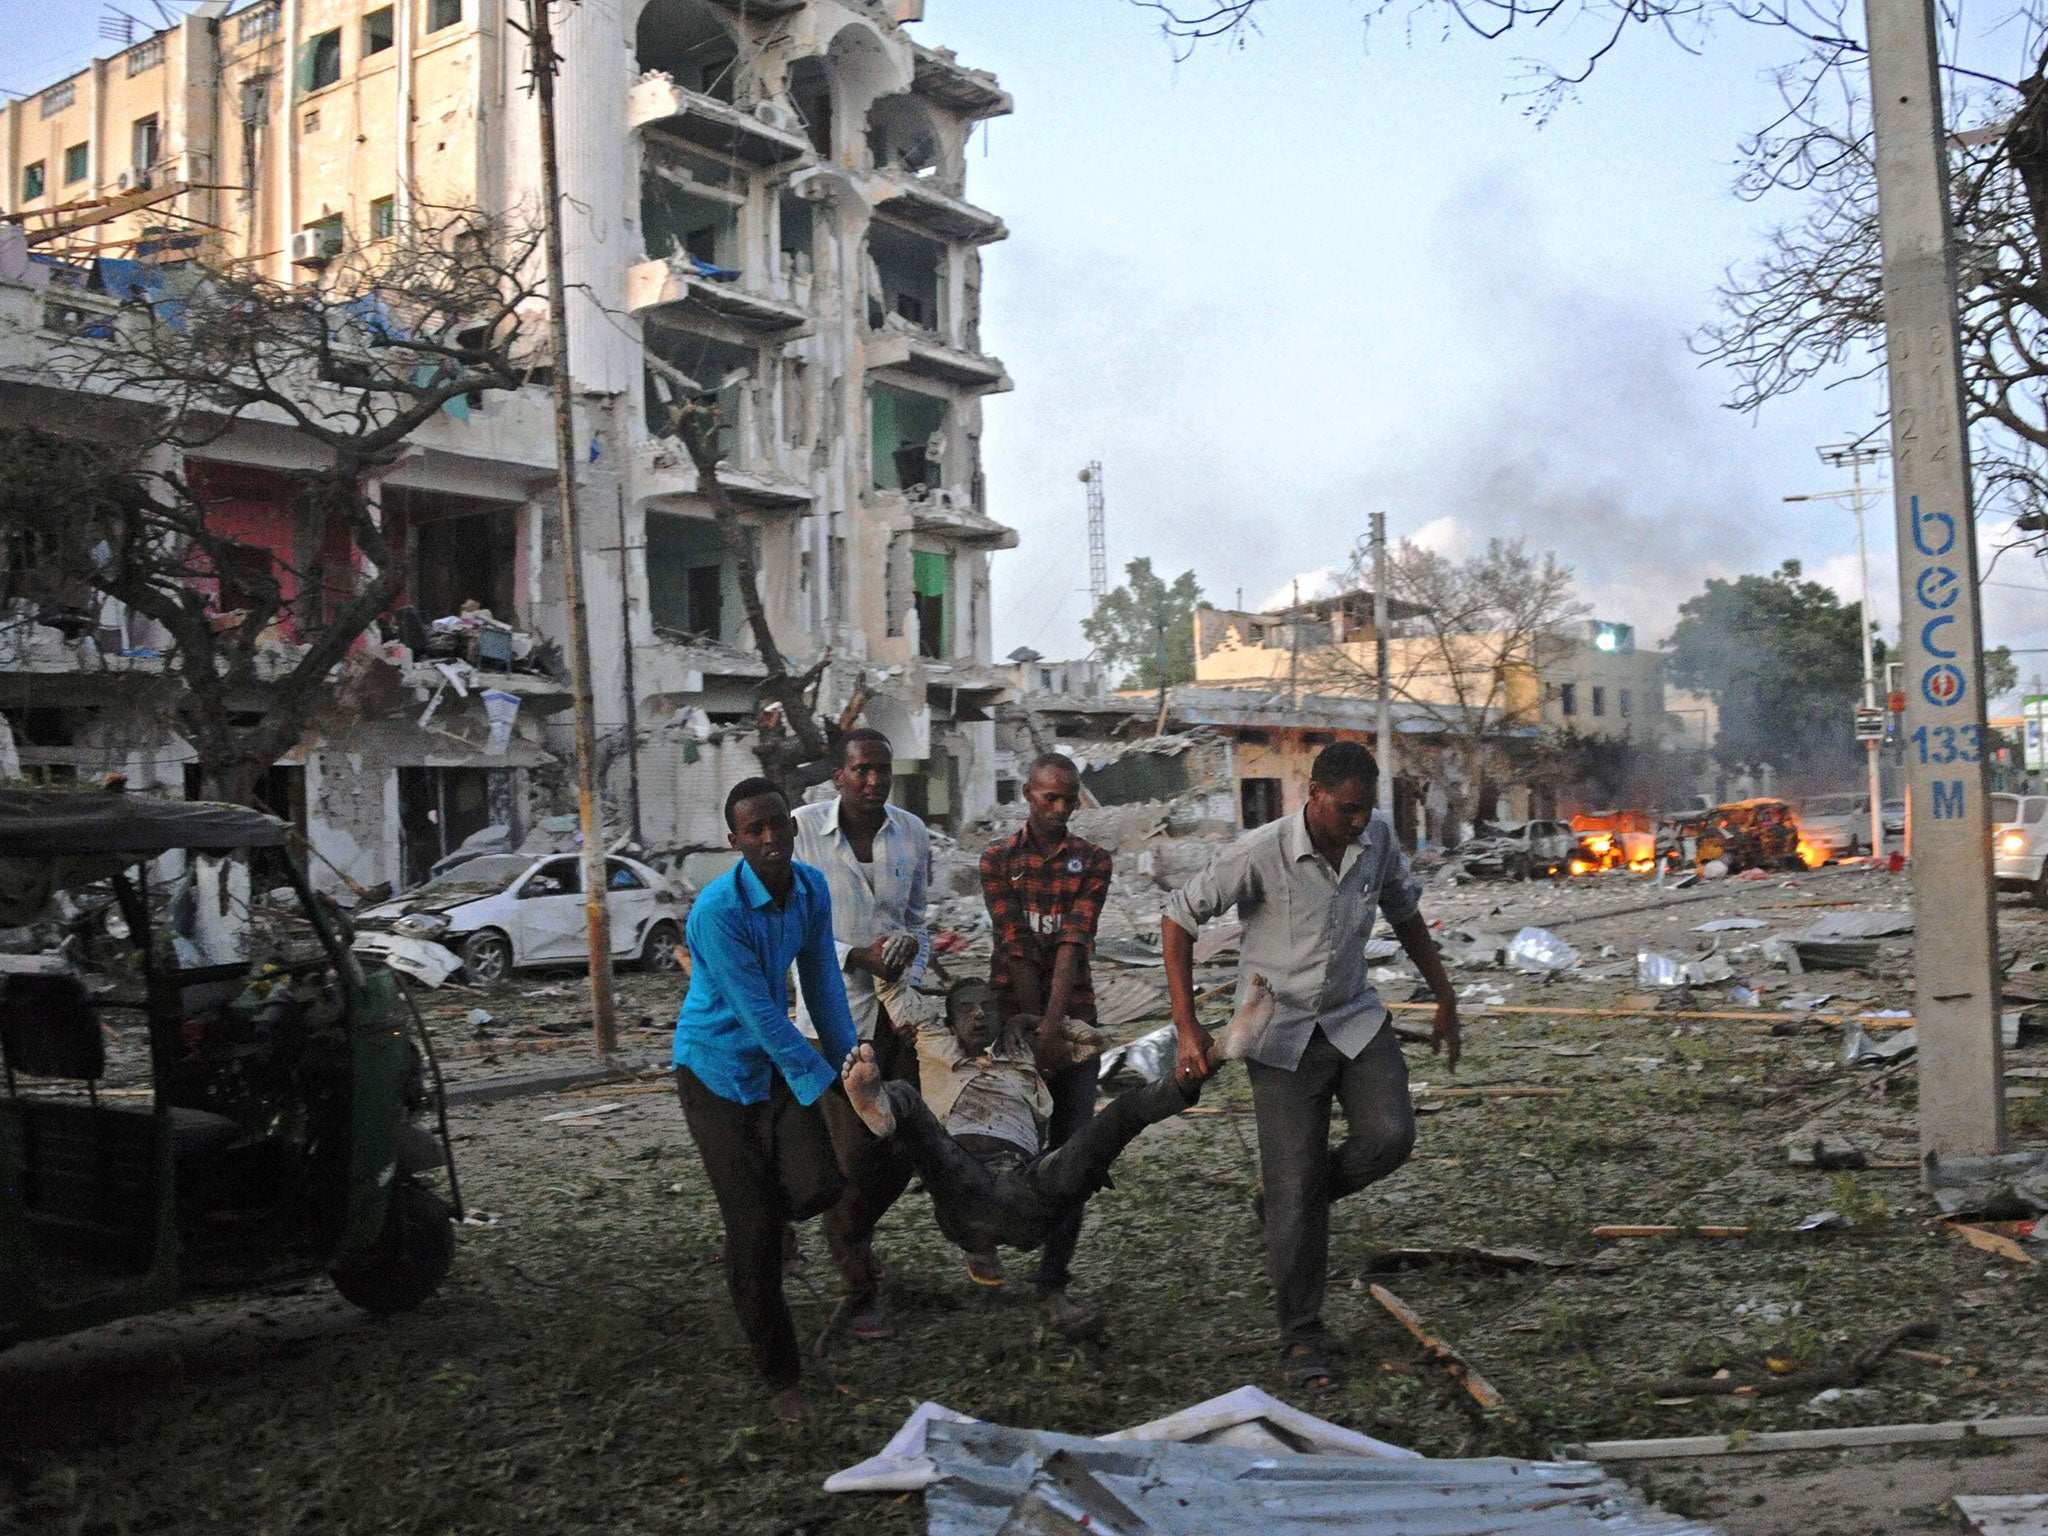 A victim of a terror attack is carried away from the Ambassador Hotel, after a car bomb exploded on June 1